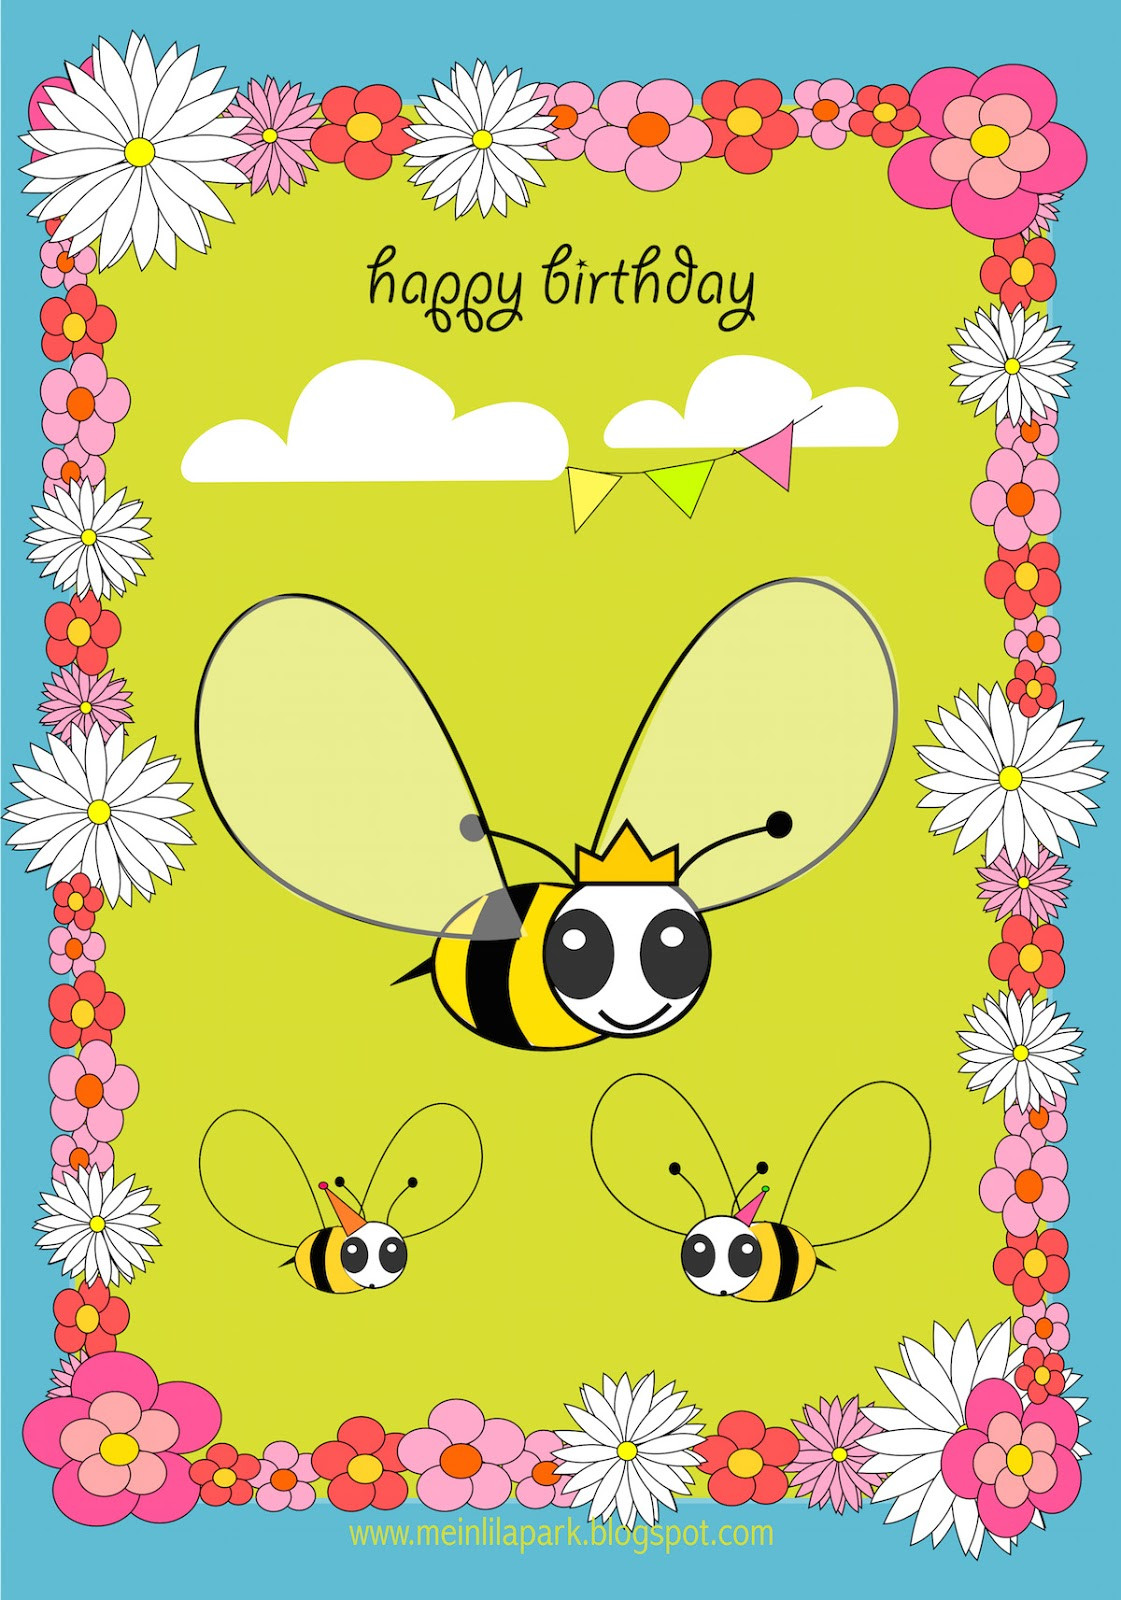 Free Printable Birthday Cards For Kids
 Free printable Happy Birthday card for kids ausdruckbare